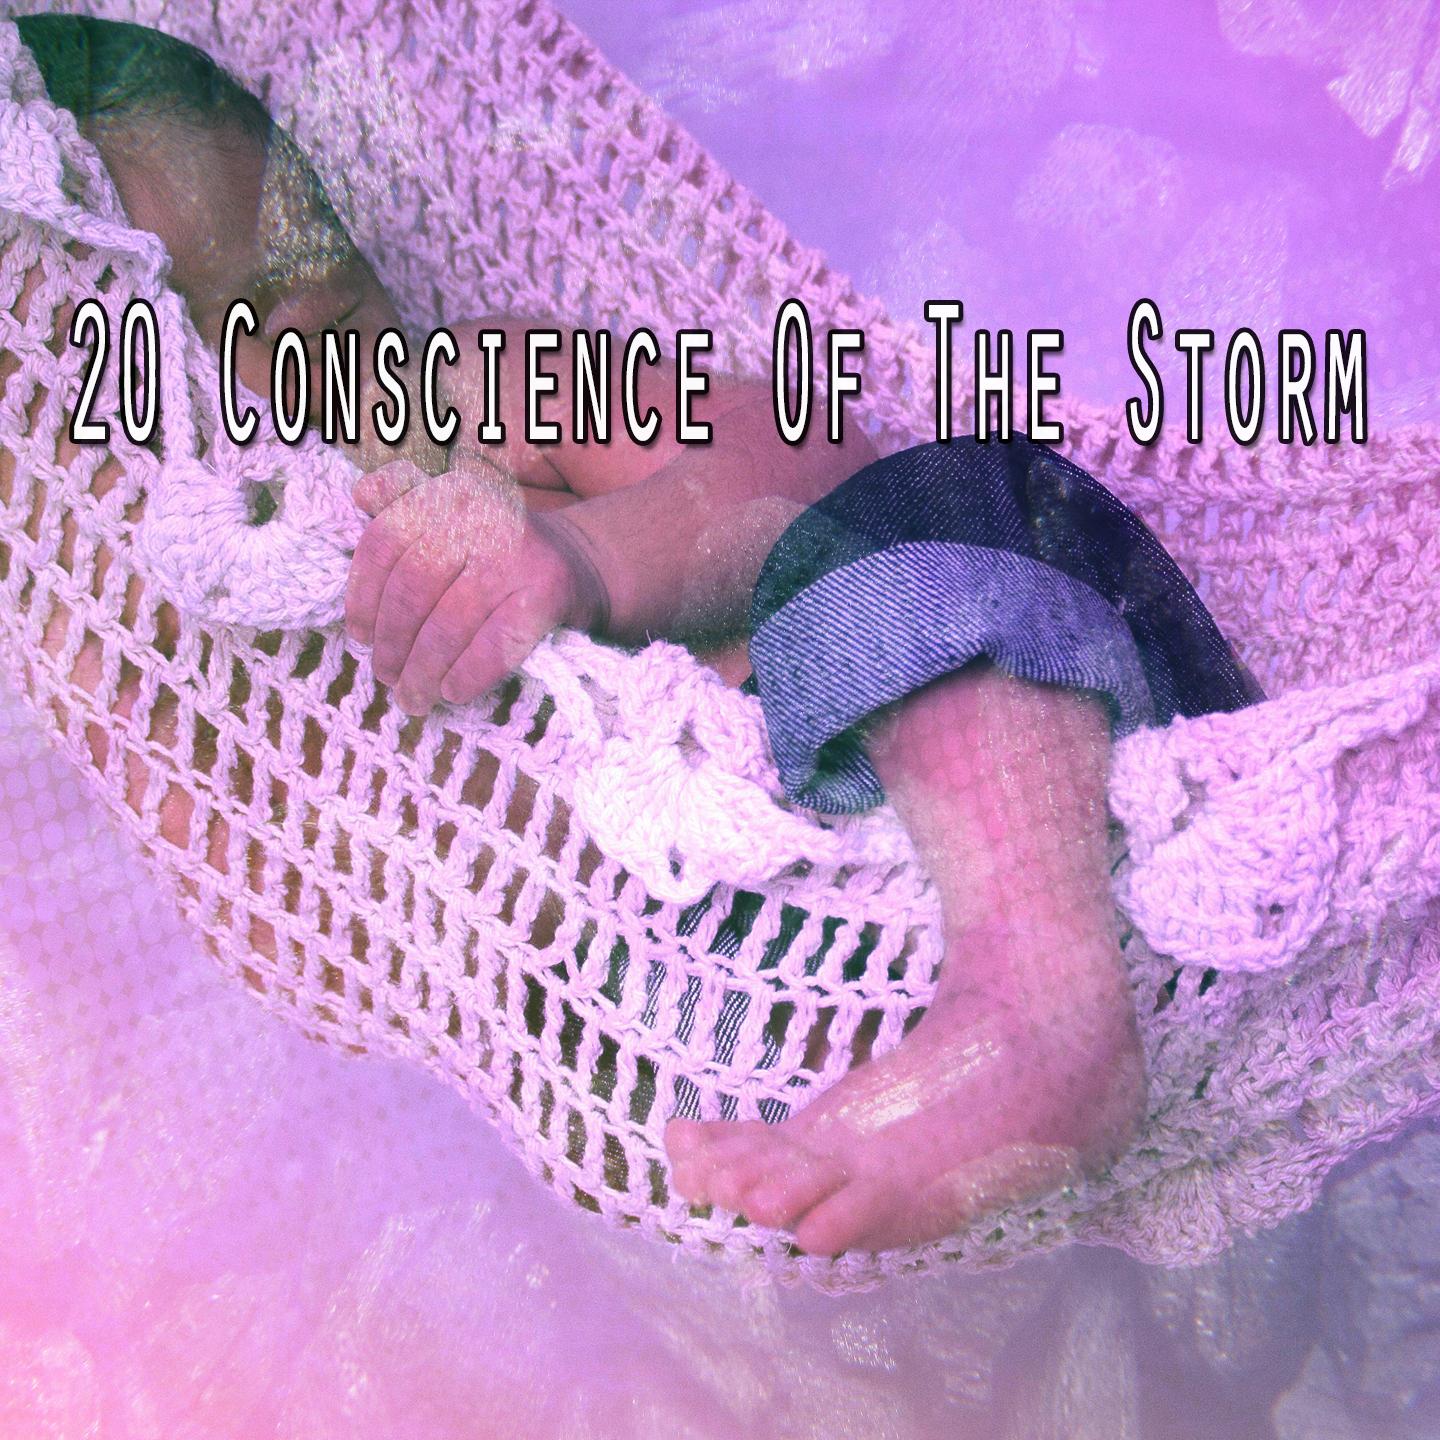 20 Conscience of the Storm